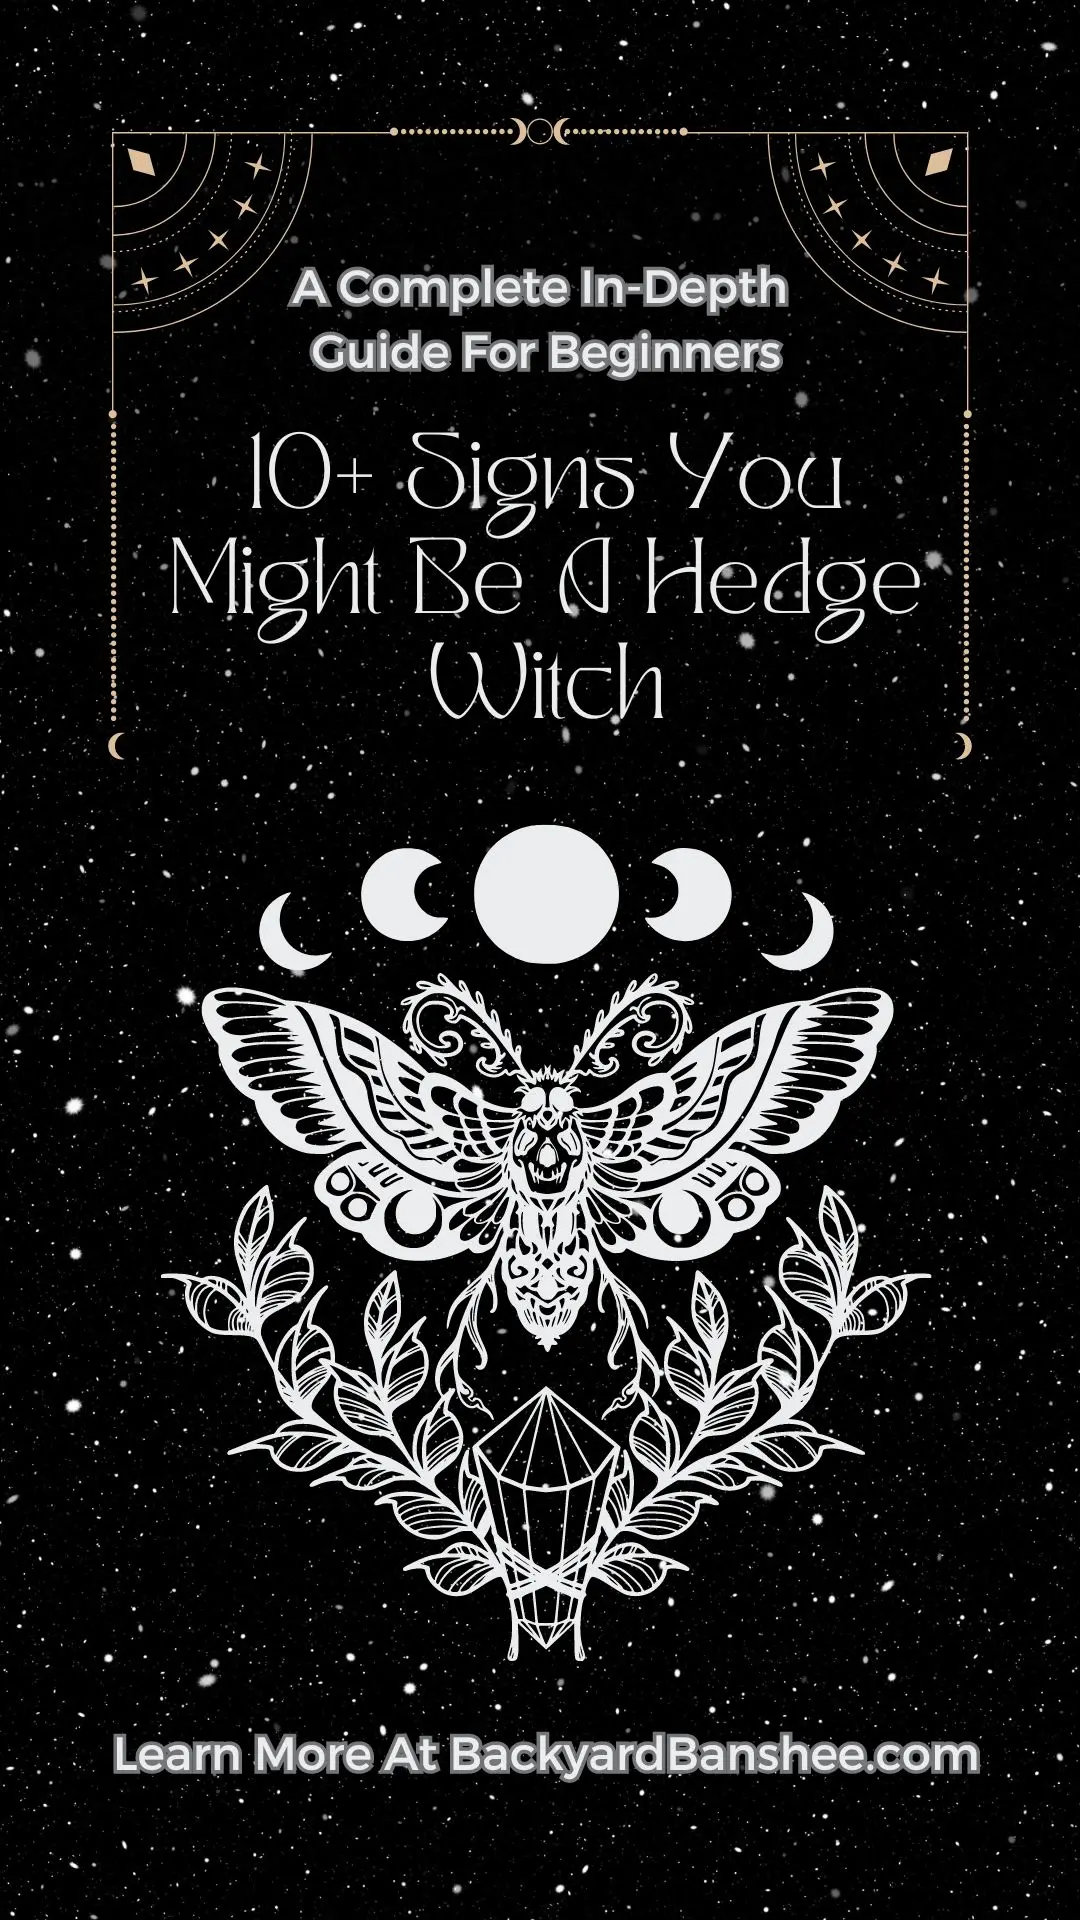 10 signs you may be a hedge witch